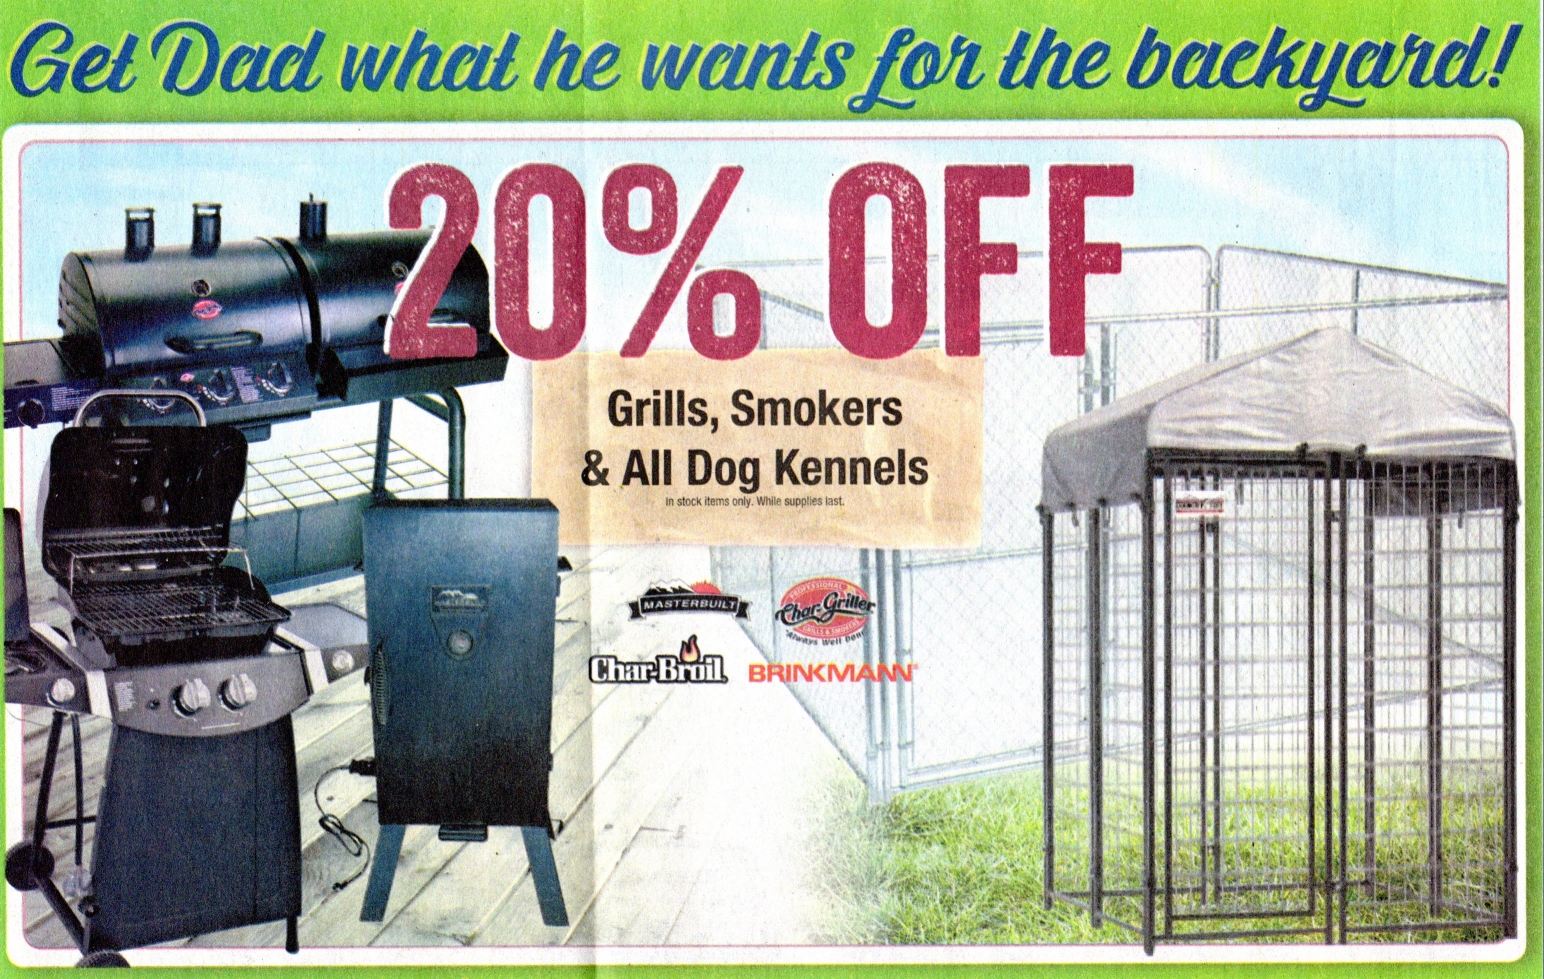 Grills, smokers, and dog kennels